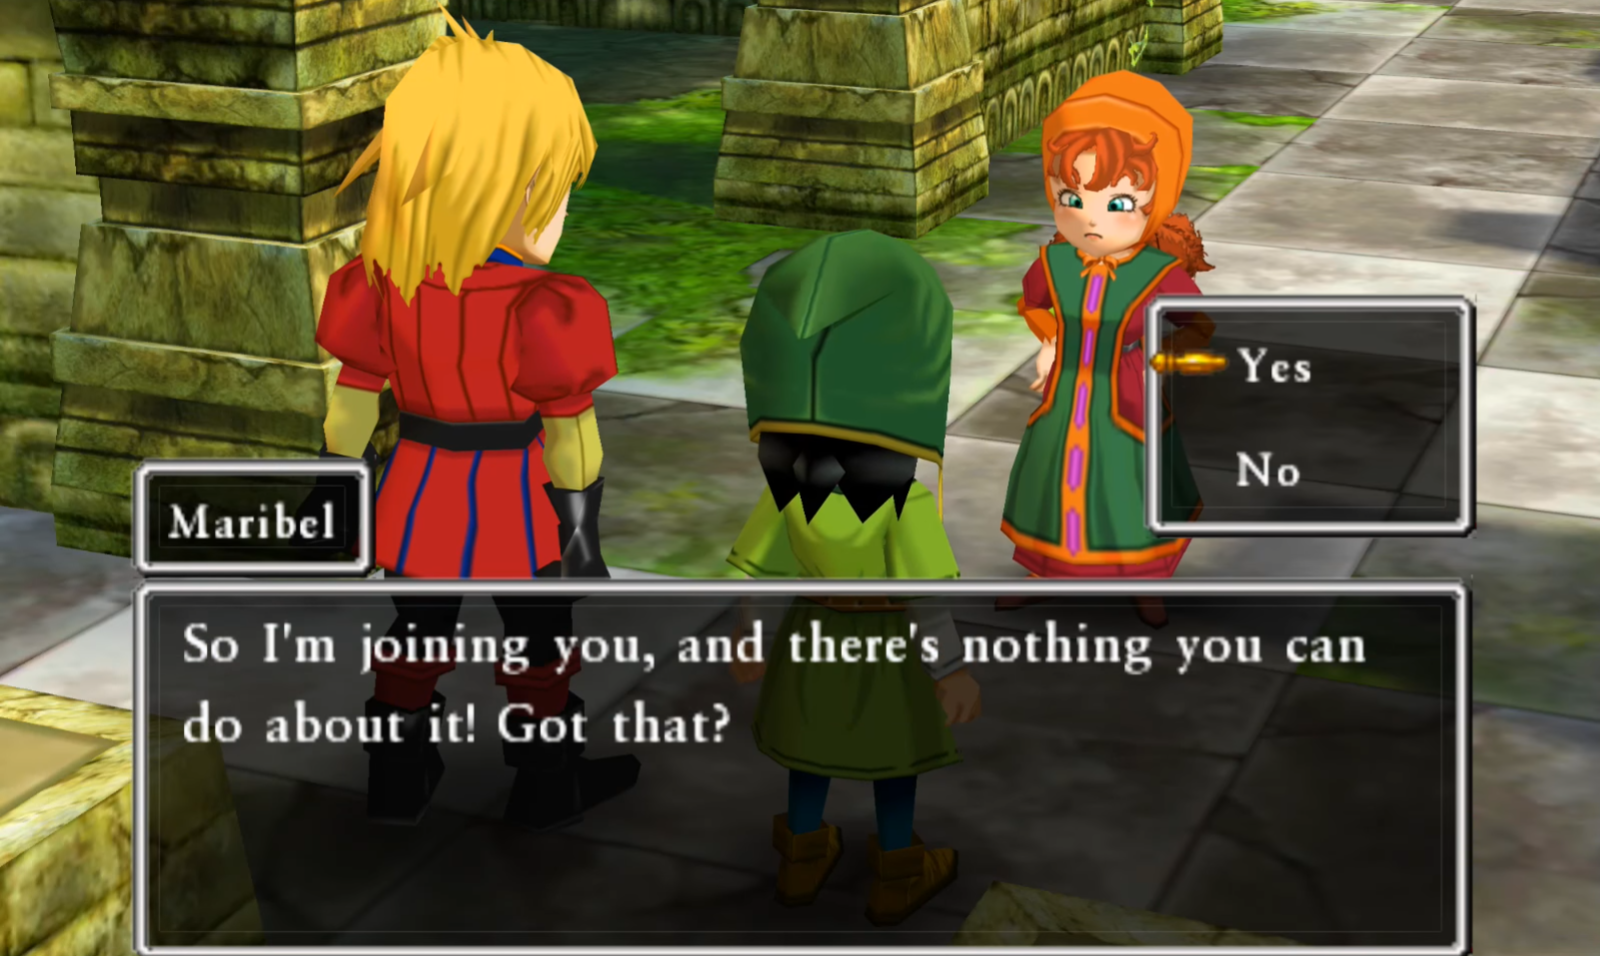 No matter what you choose, Maribel will join you | Dragon Quest VII